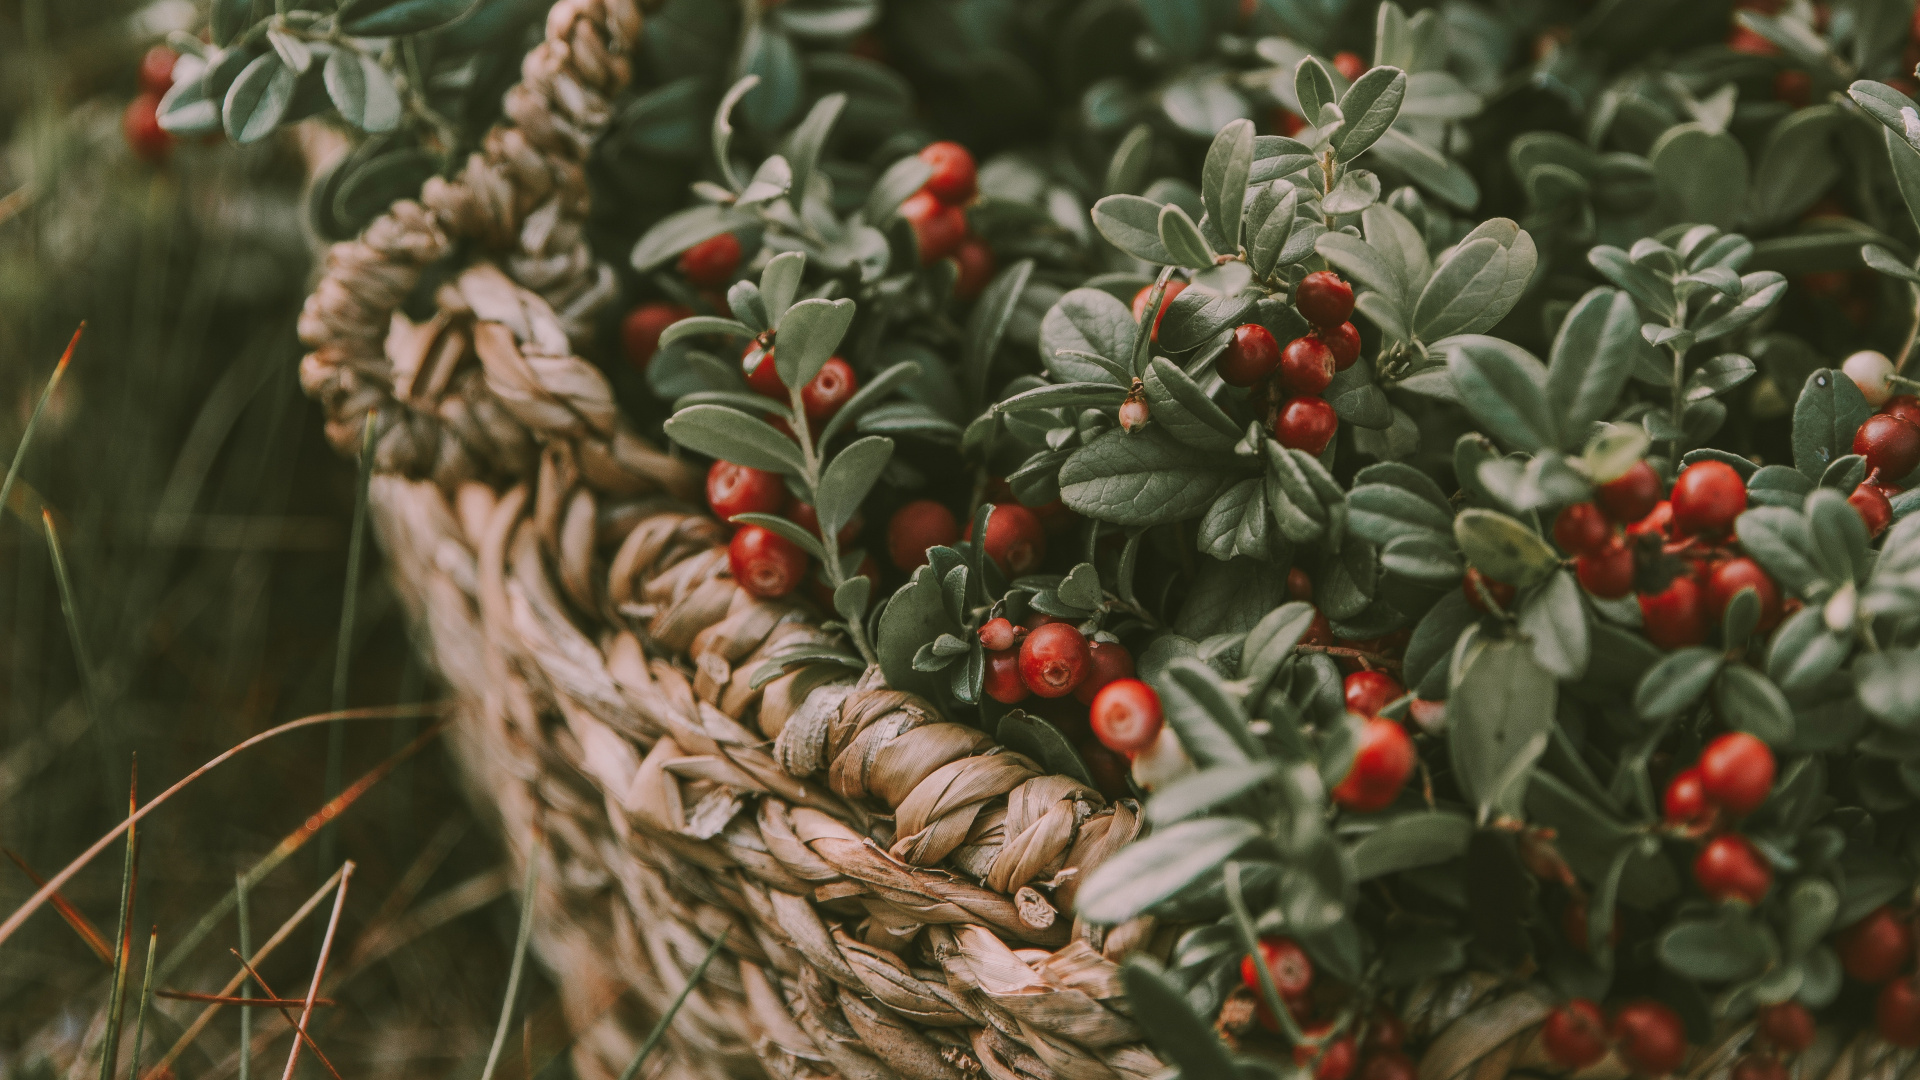 Red and Green Round Fruits in Brown Woven Basket. Wallpaper in 1920x1080 Resolution